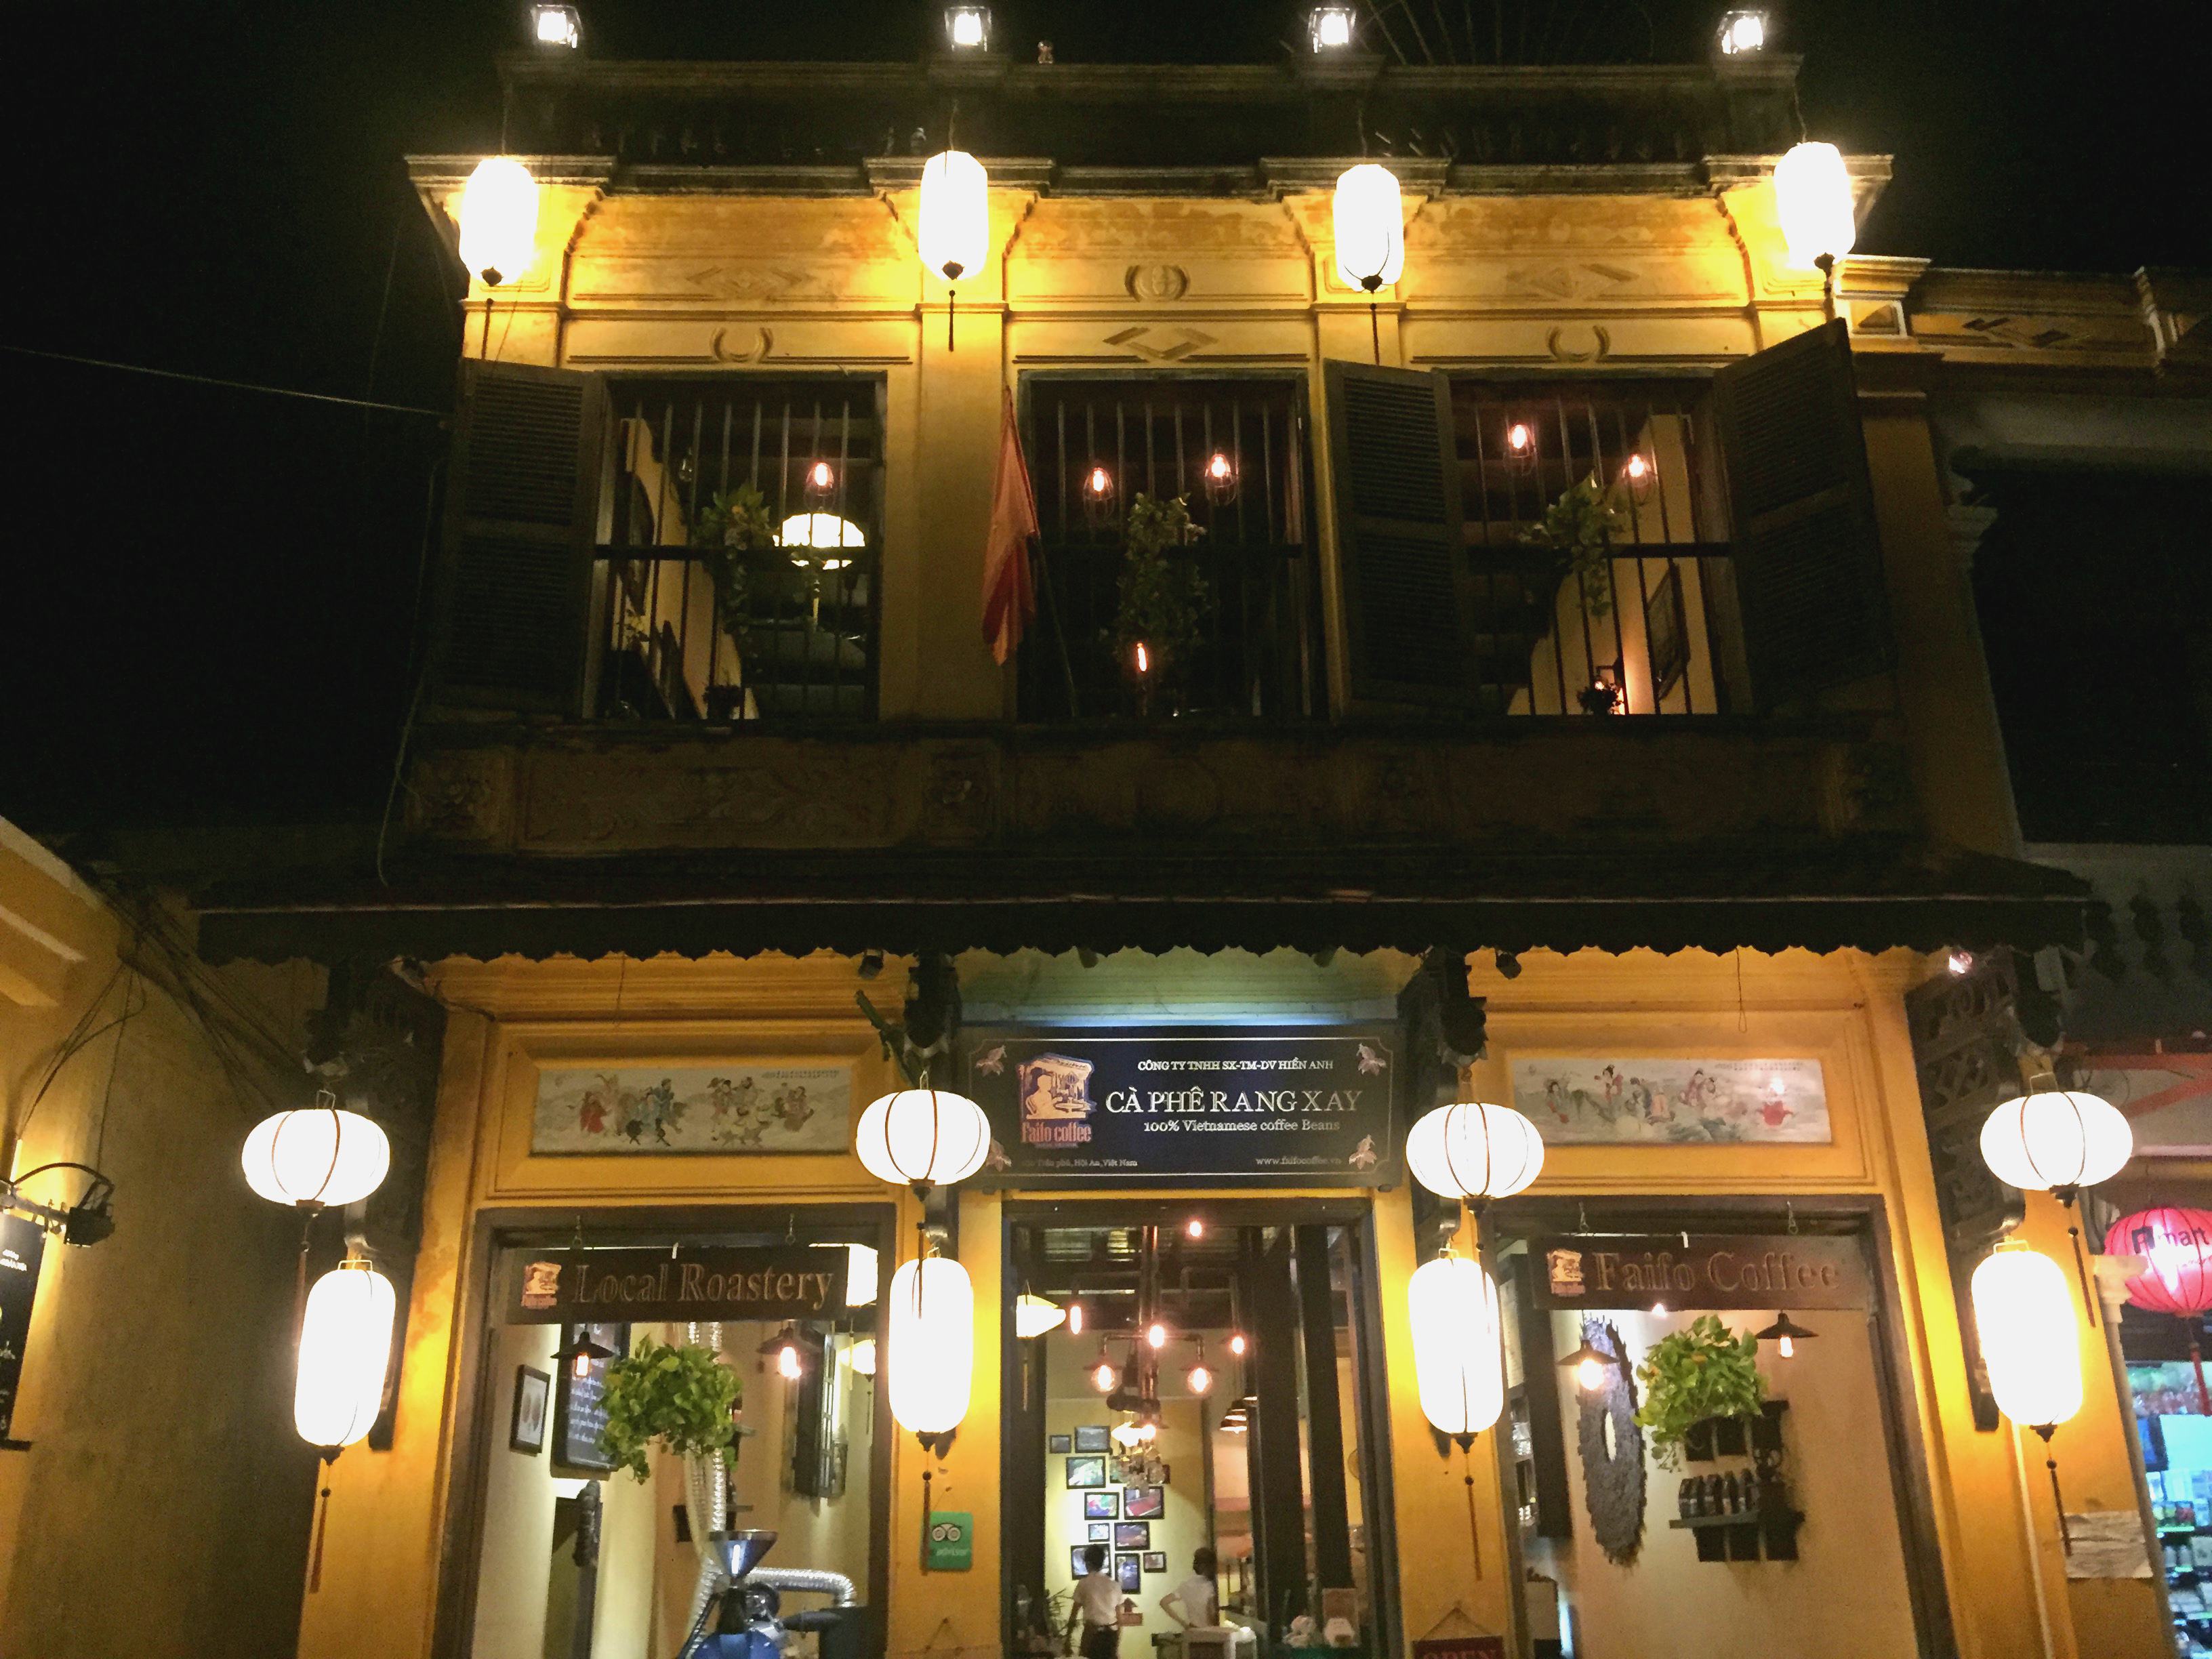 Things to do in Hoi An